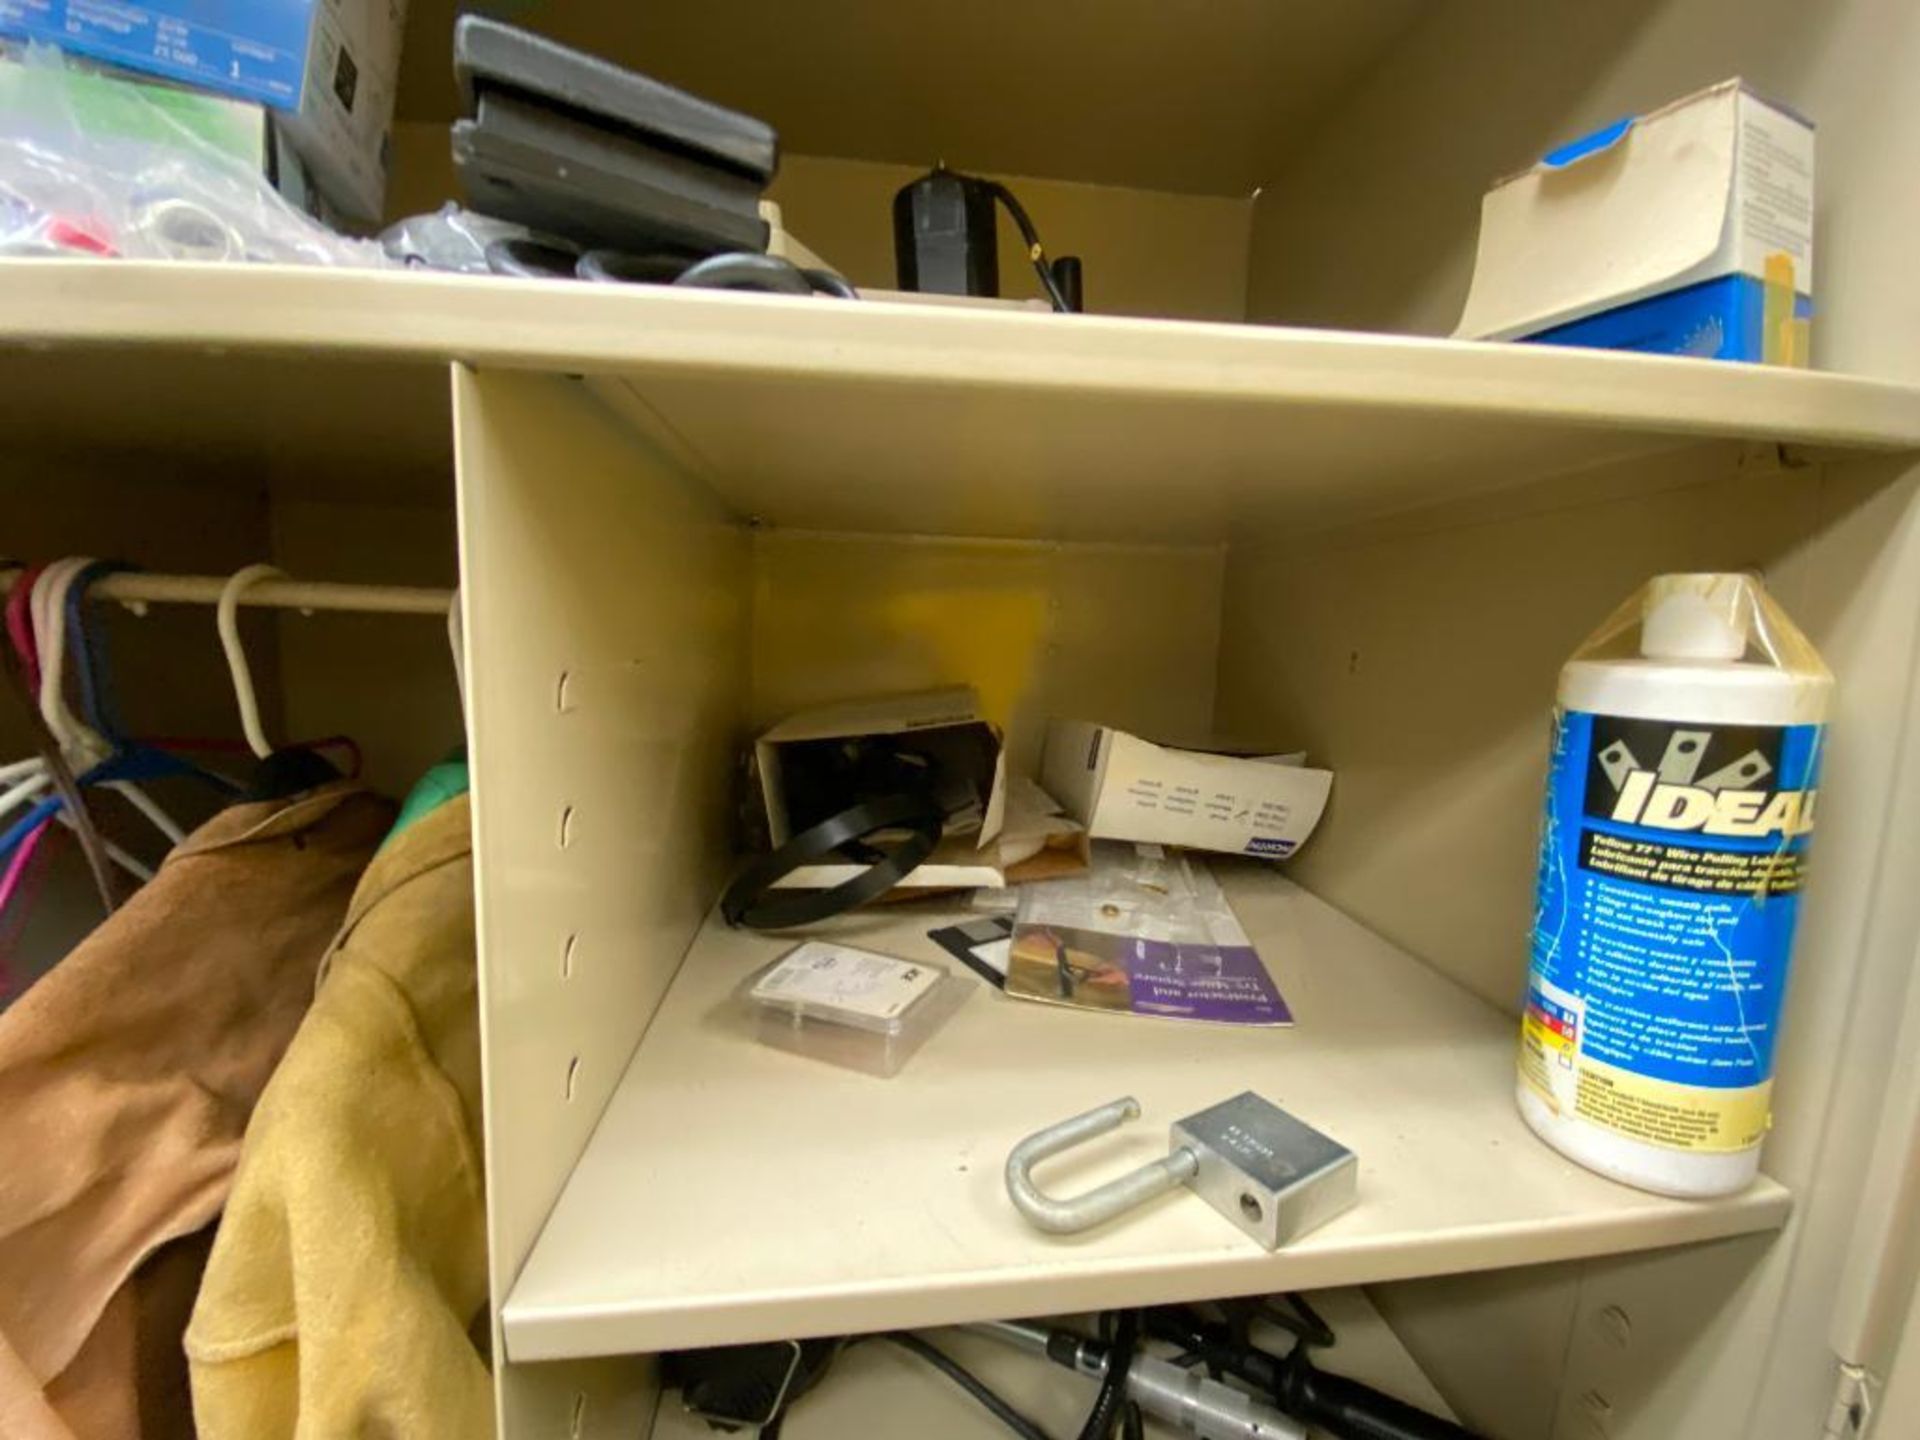 contents of supply room, JustRite flammable storage cabinets, SPX pump, assorted bits, Cryospray, in - Image 21 of 31